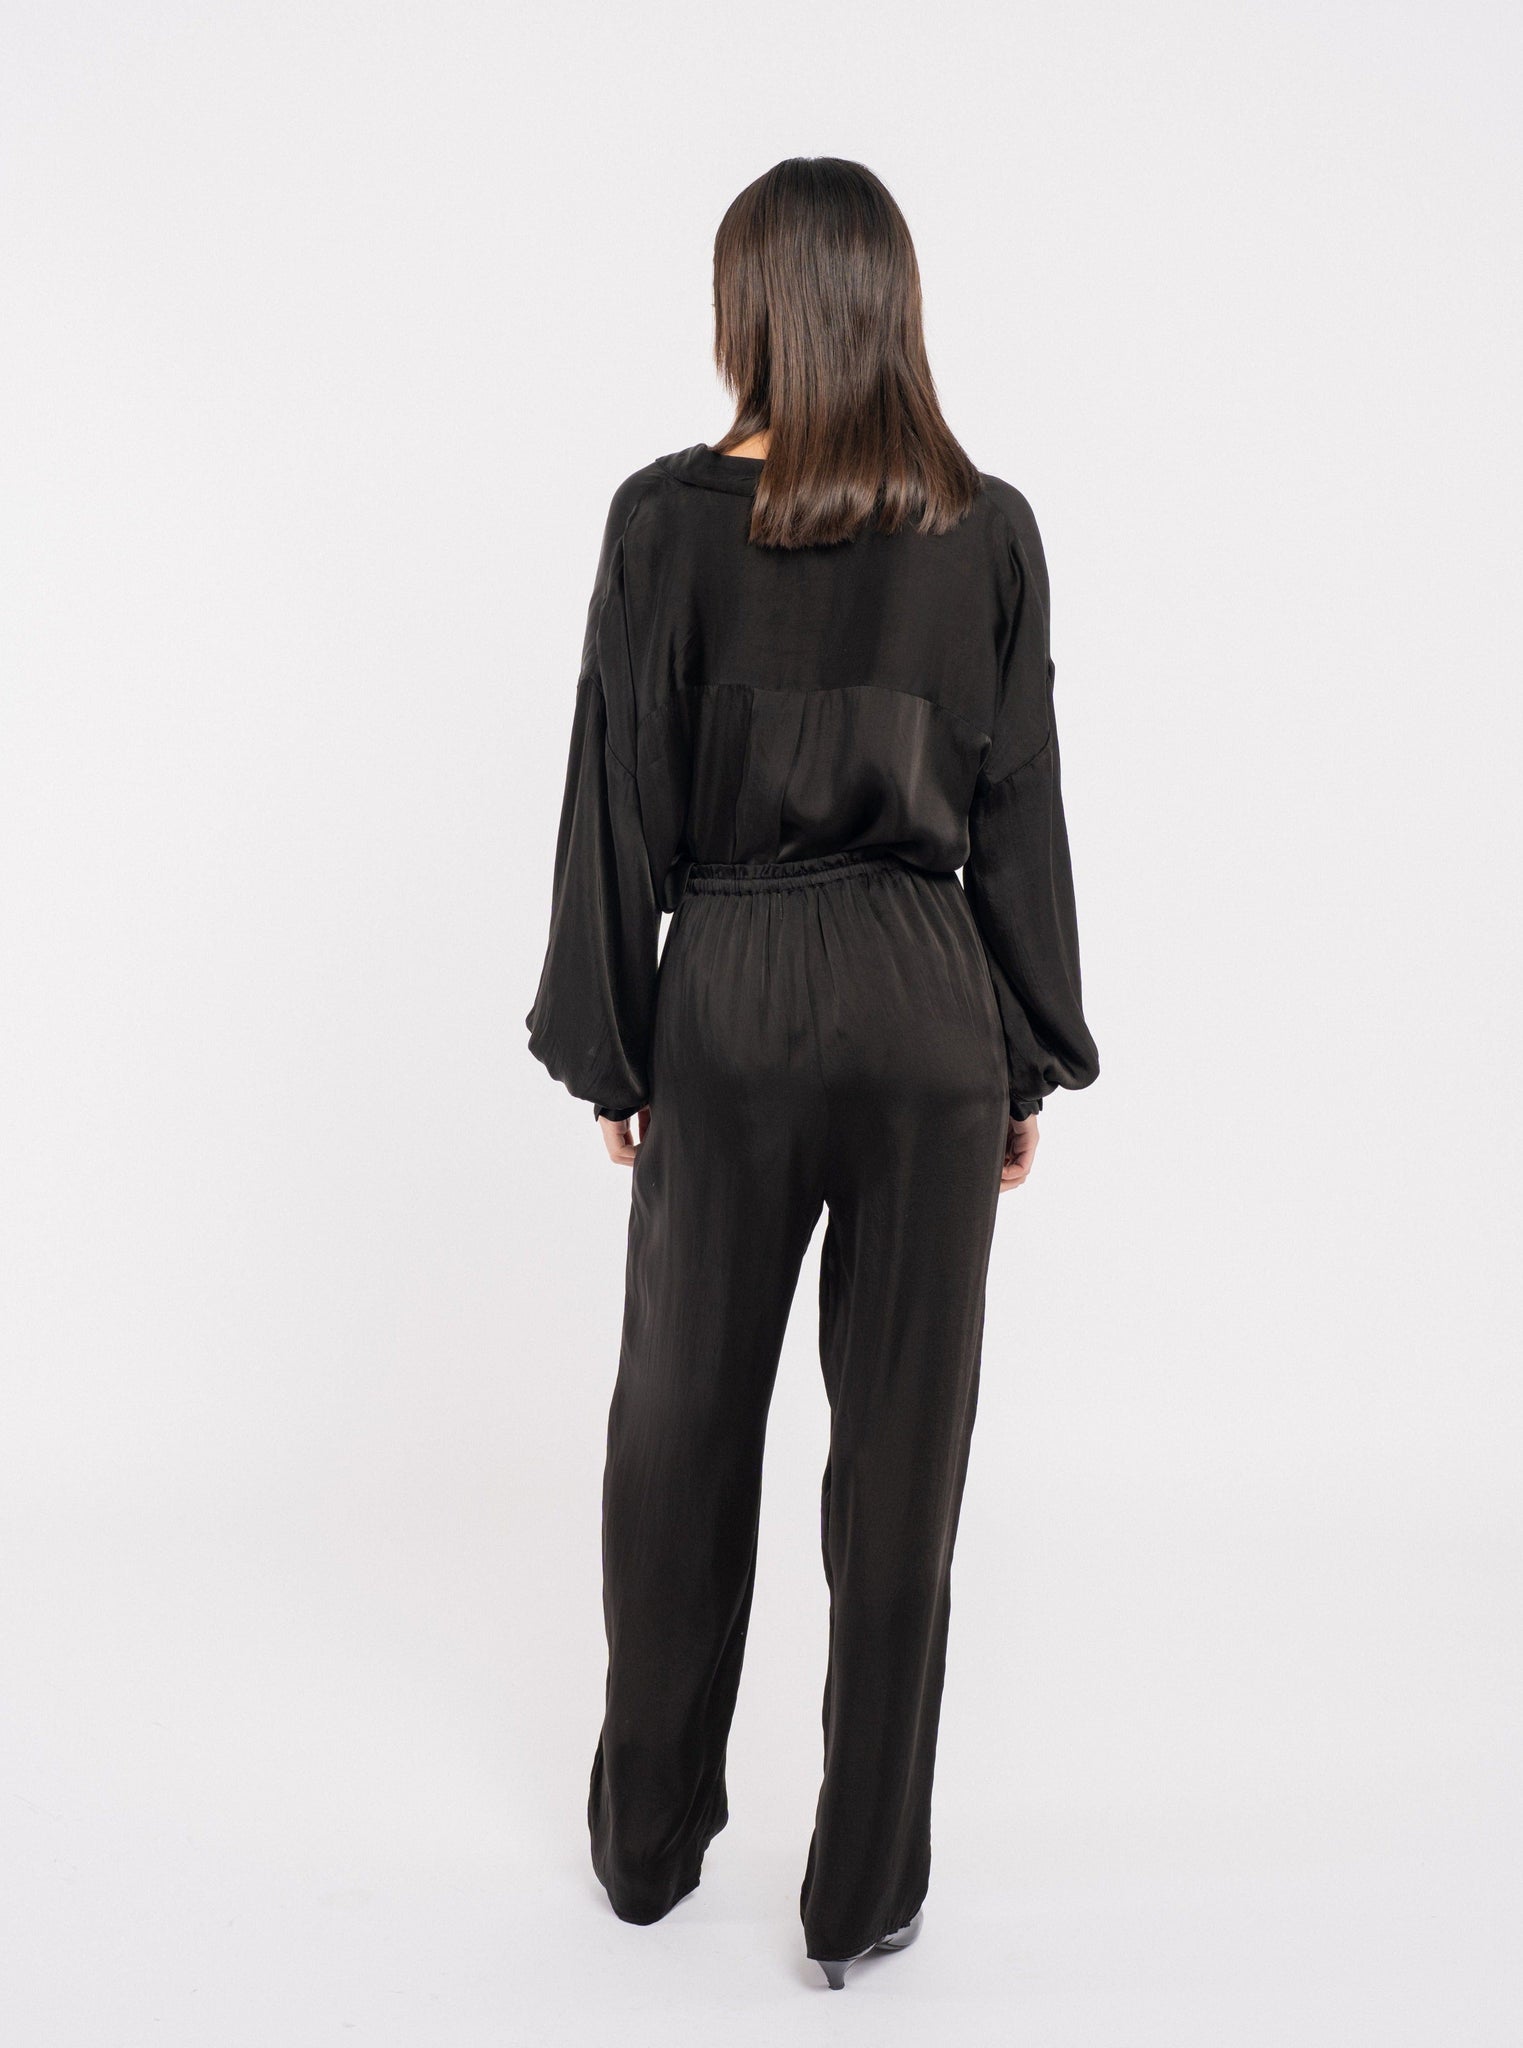 The back view of a woman wearing the Leonie Pant - Black, made from Bemberg cupro fabric.